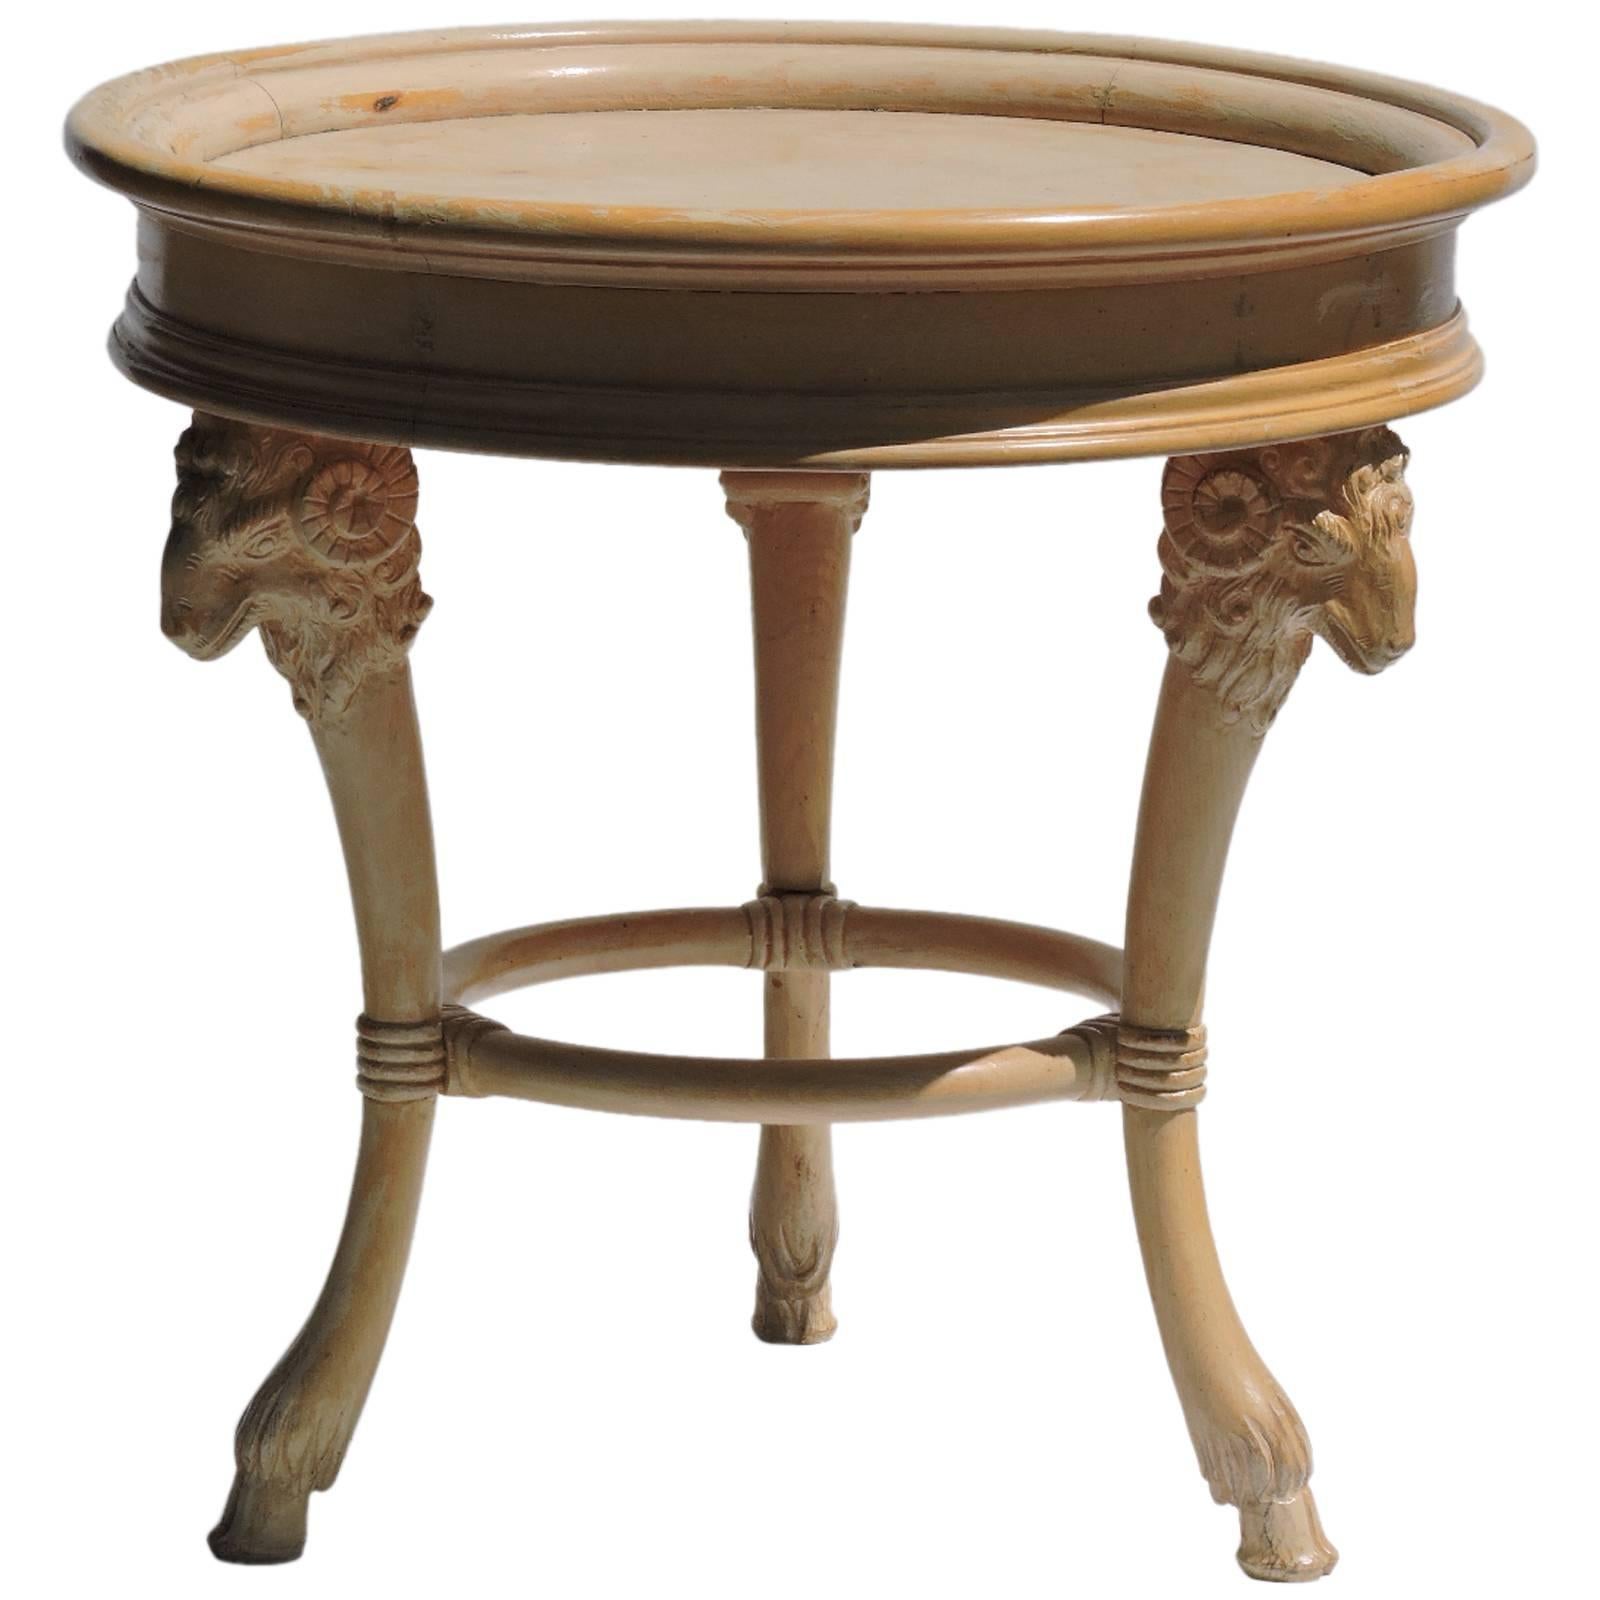 Neoclassical style Rams Head Center Table